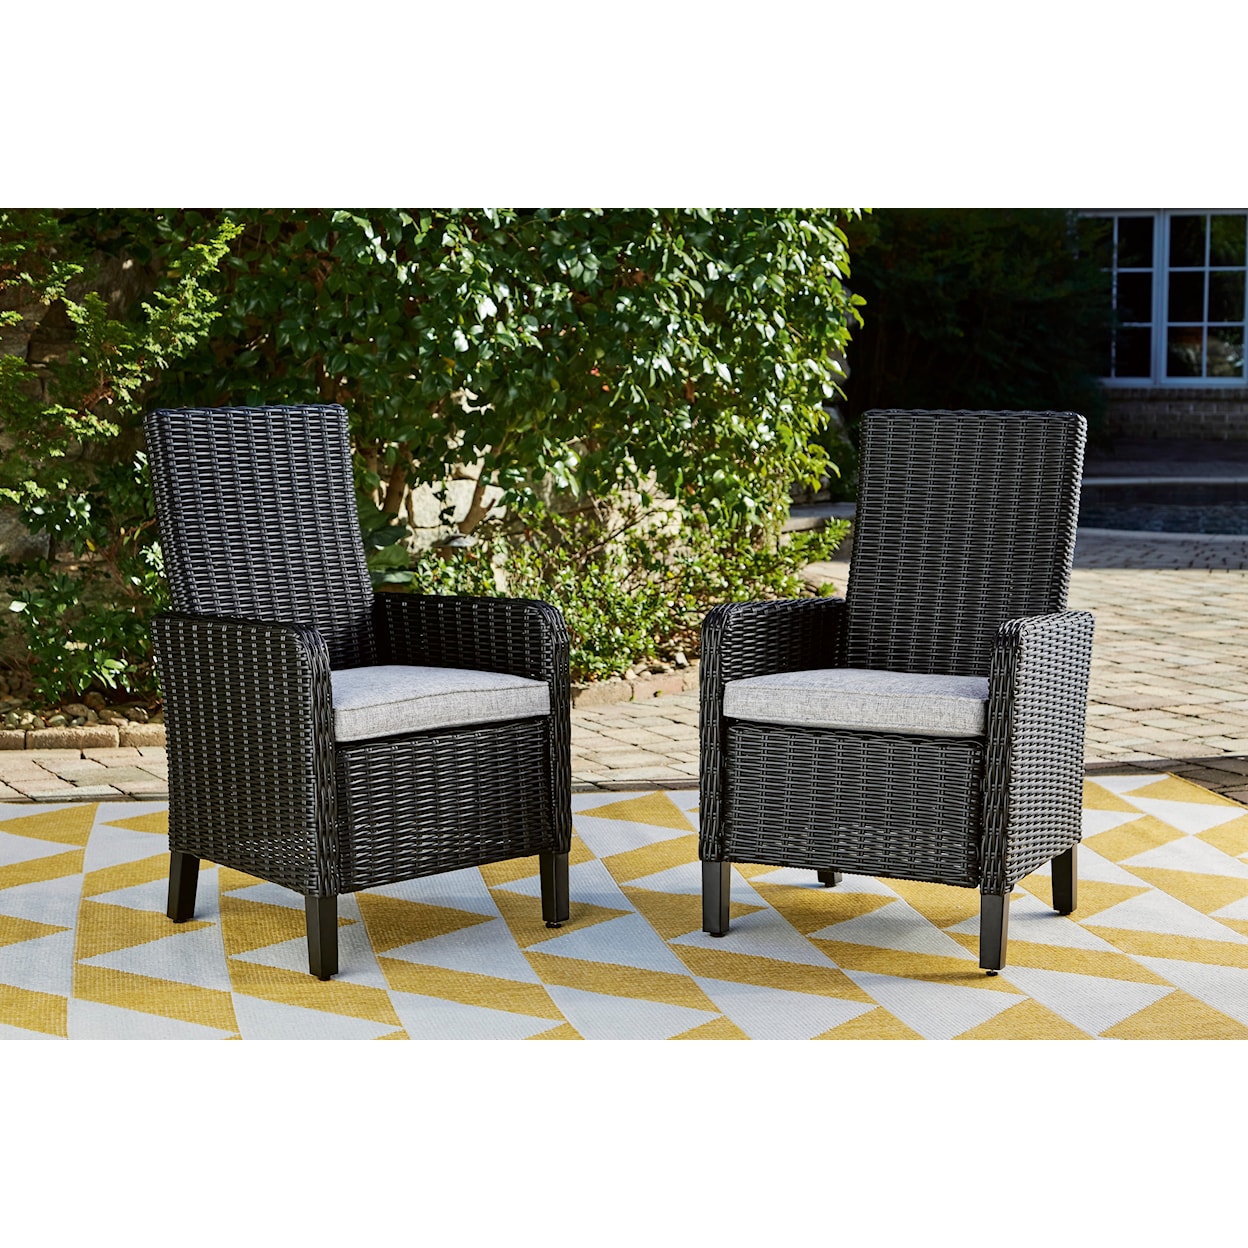 StyleLine Beachcroft Set of 2 Arm Chairs with Cushion